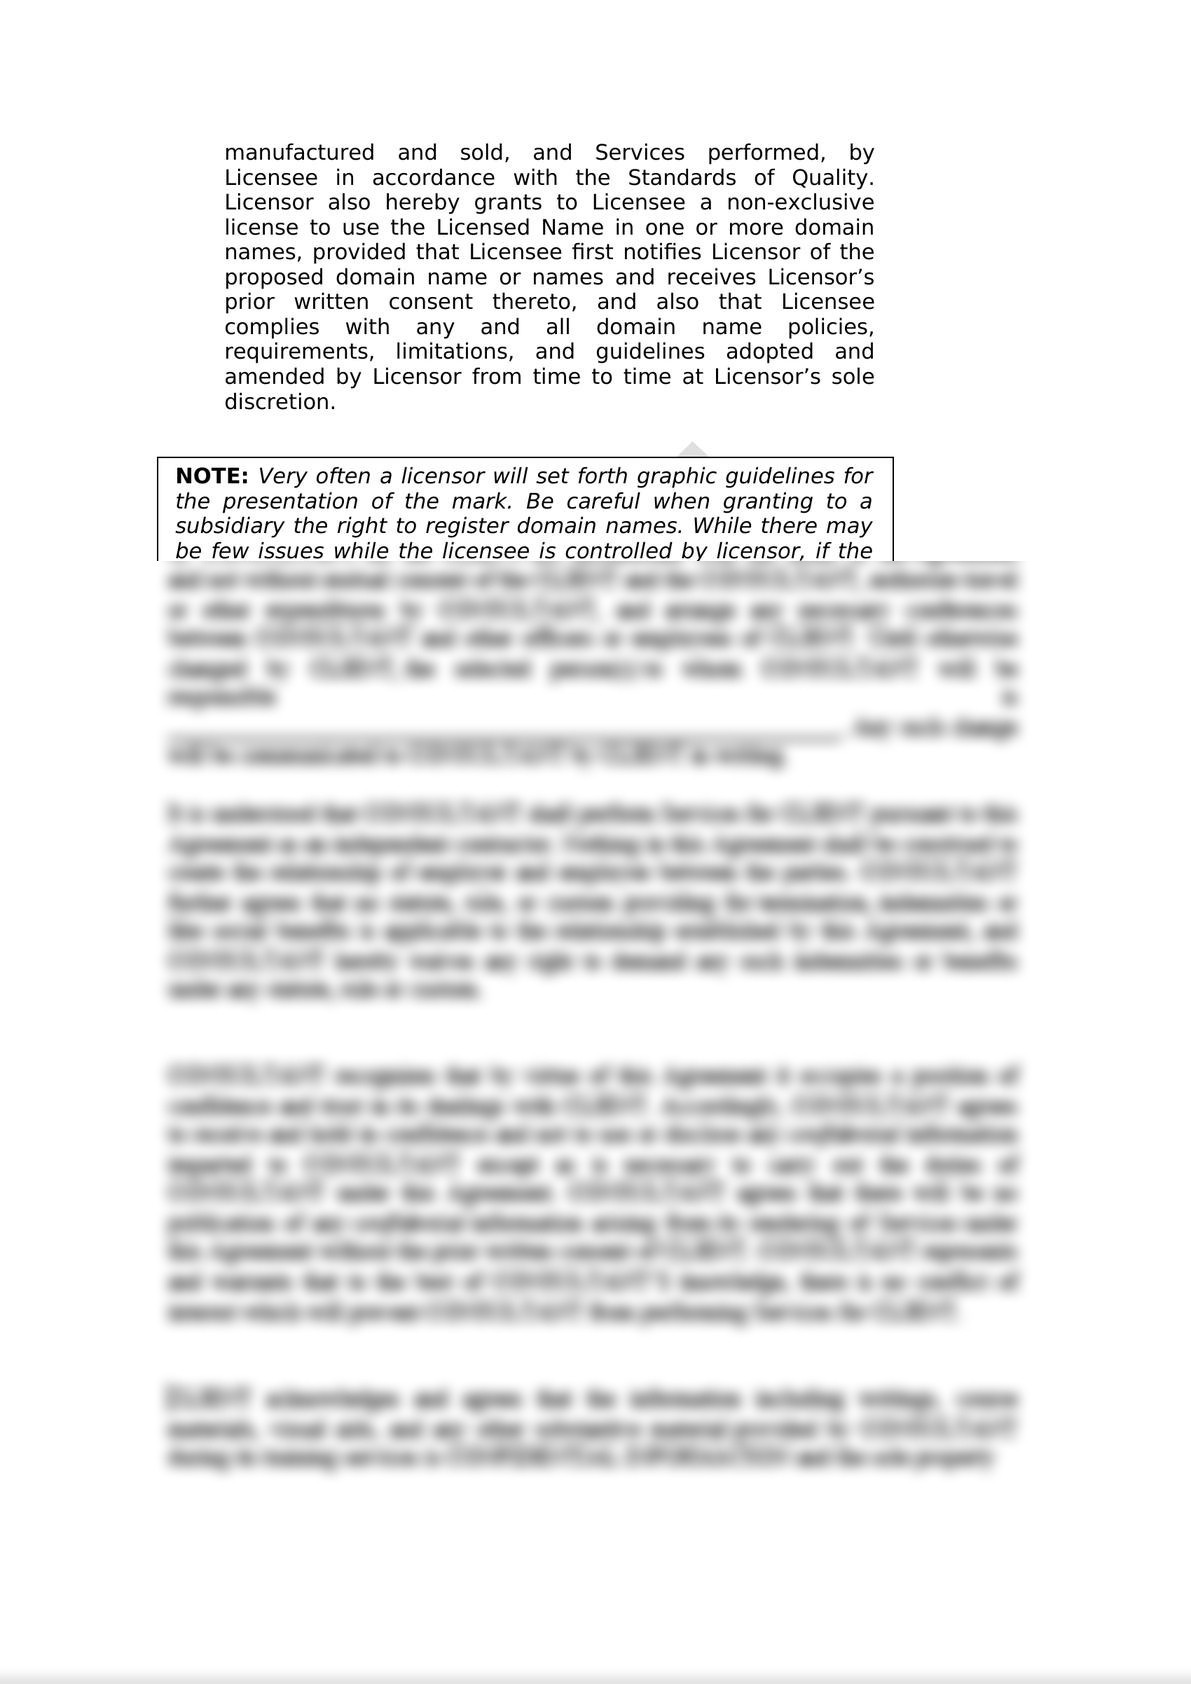 Inter-Company Intellectual Property Licensing Agreement-3